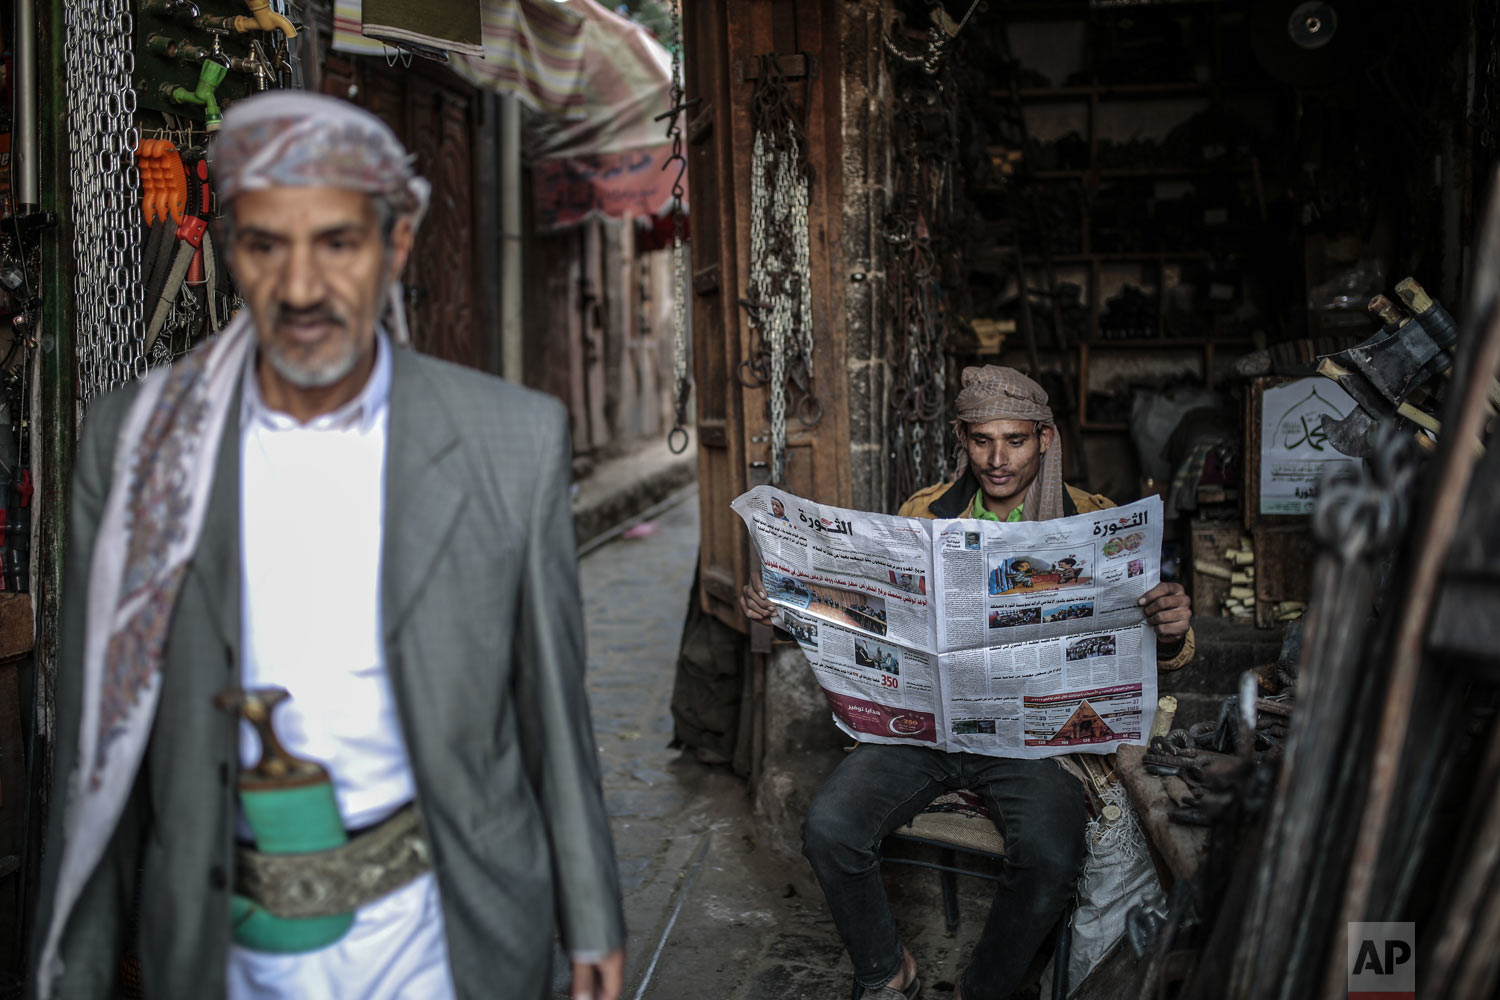  A man reads al-Thawra newspaper at Souq al-Melh marketplace in the old city of Sanaa, Yemen, Tuesday, Dec. 11, 2018. Yemen's warring sides agreed Thursday to an immediate cease-fire in the strategic port city of Hodeida, where fighting has disrupted